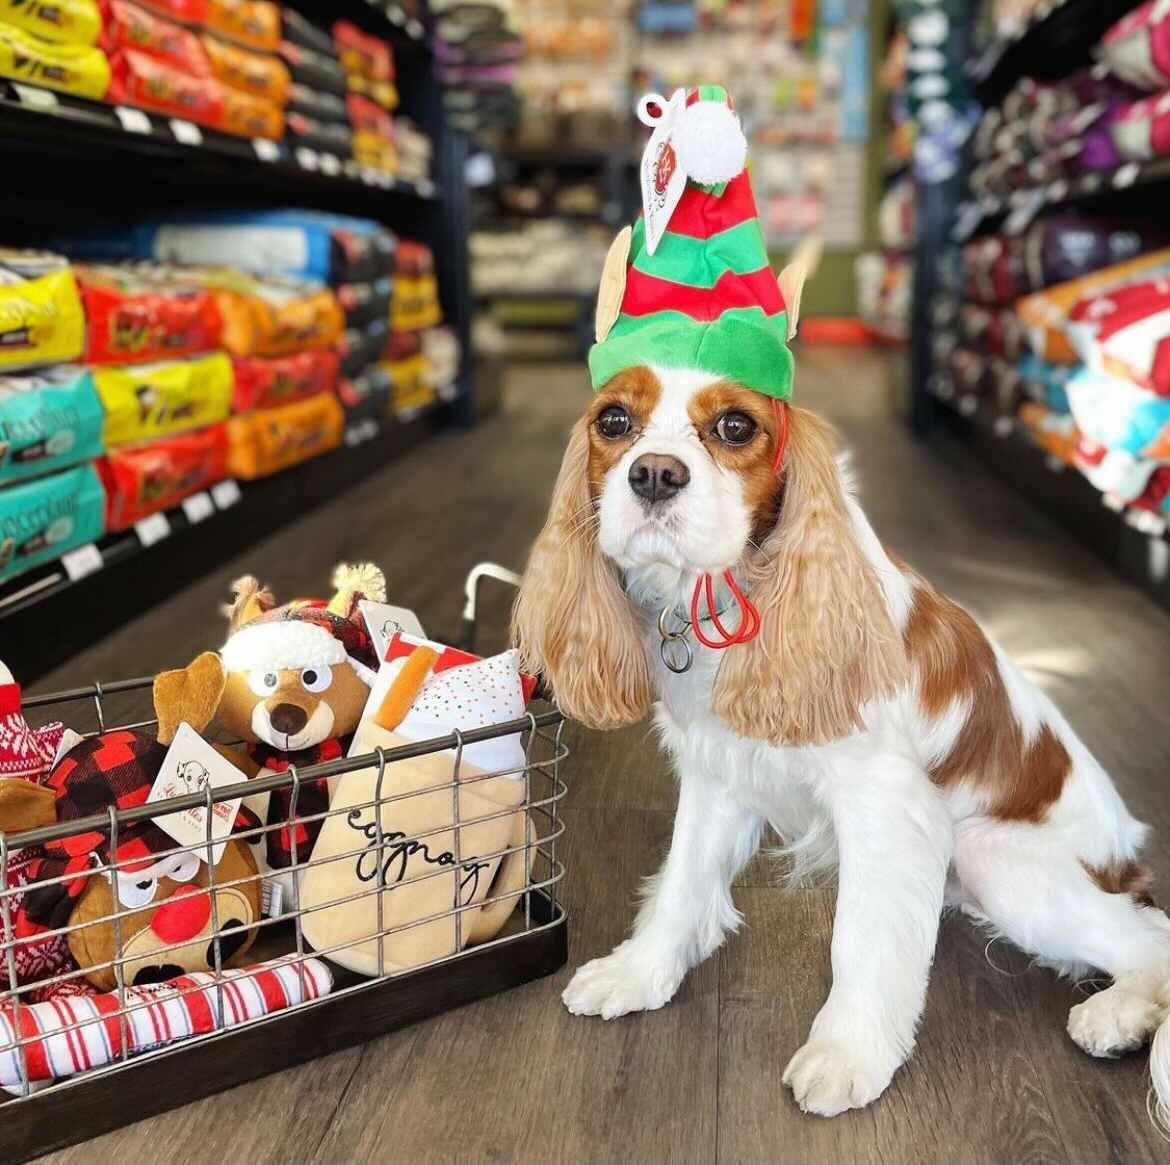 Pet Friendly Earthwise Pet Supply & Grooming of Naperville